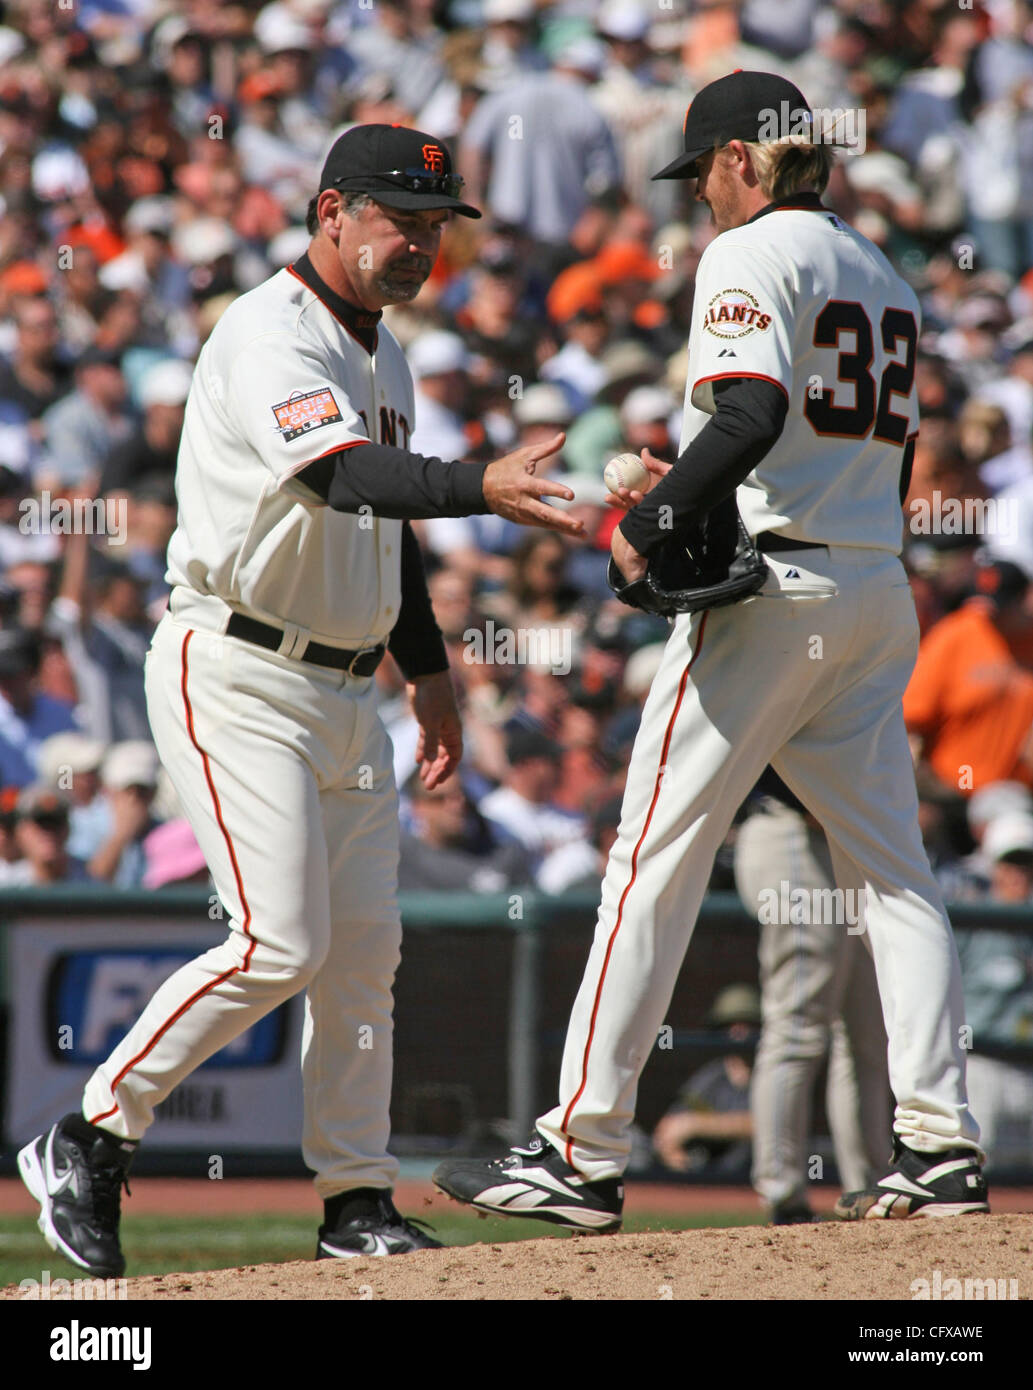 Murph: Explaining how Bruce Bochy became The Bay's favorite coach – KNBR